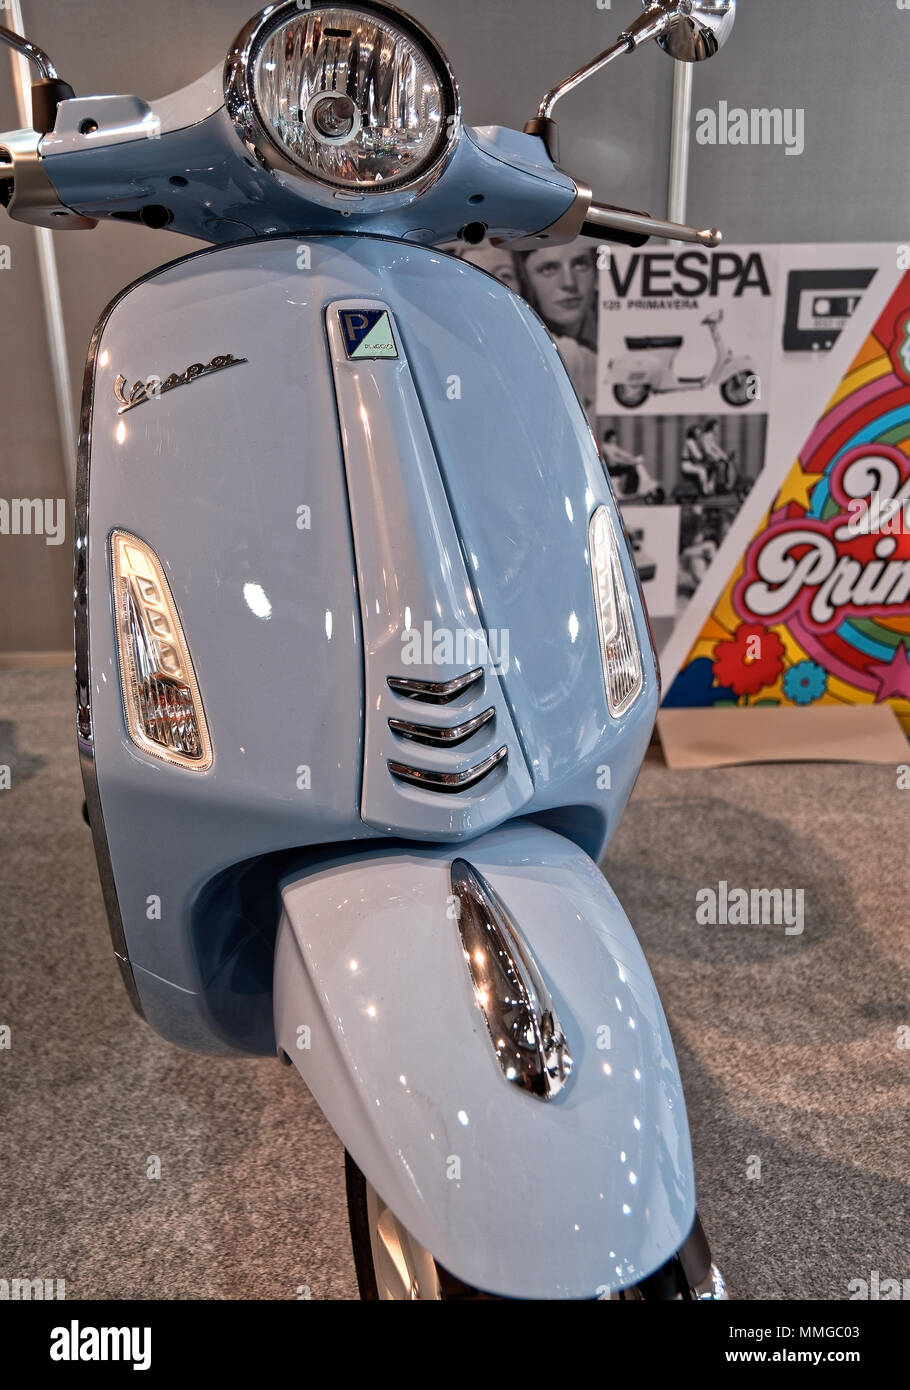 Madrid, Spain - April 06, 2018: Vespa Piaggio stand at the VIVE LA MOTO  MOTORCYCLE Show in Madrid, Spain Stock Photo - Alamy